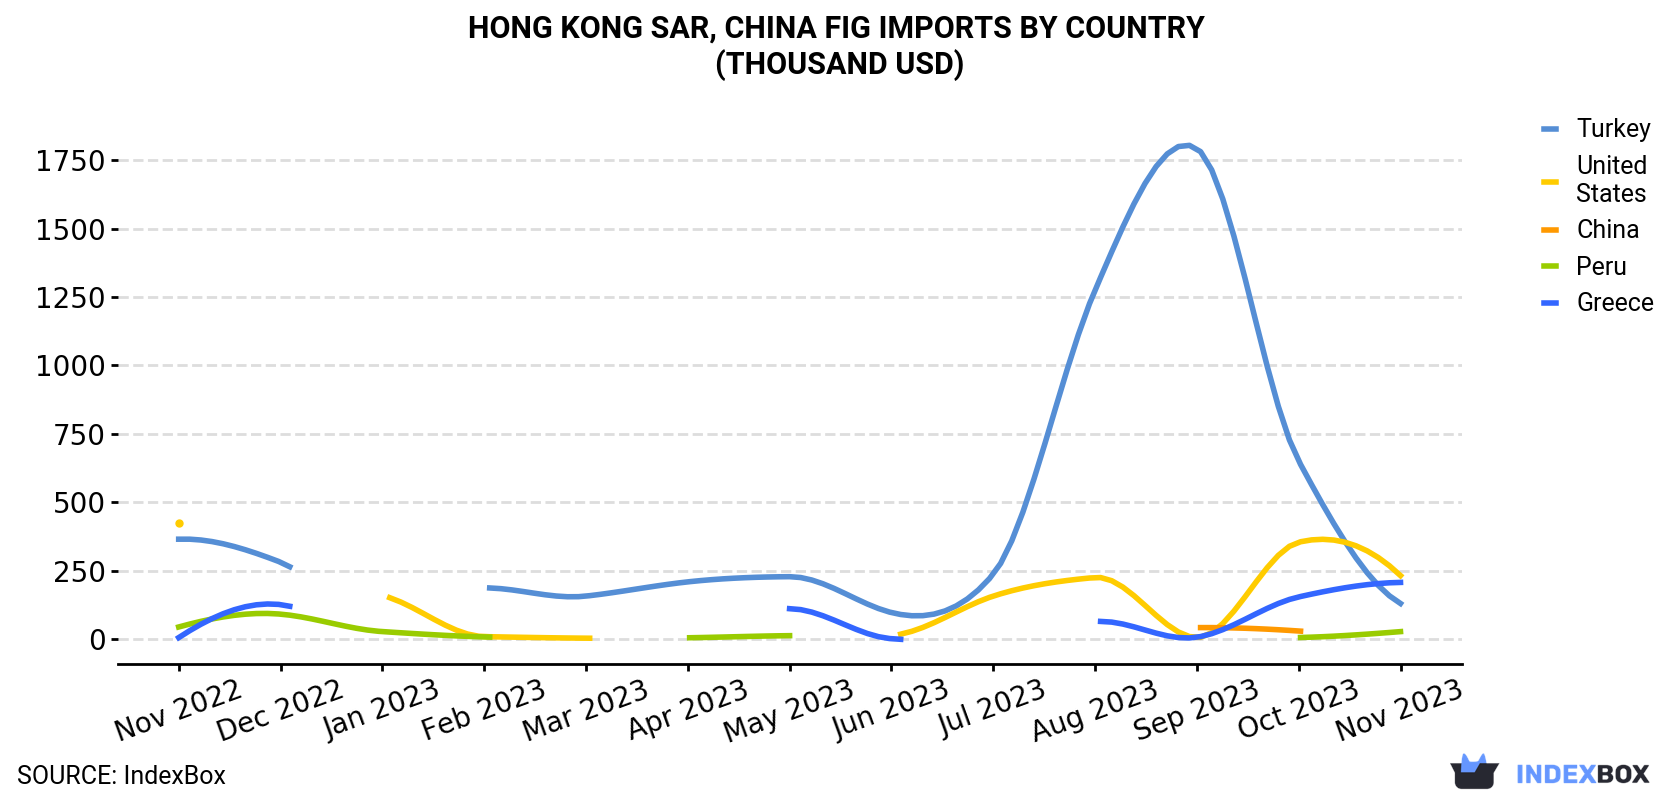 Hong Kong Fig Imports By Country (Thousand USD)